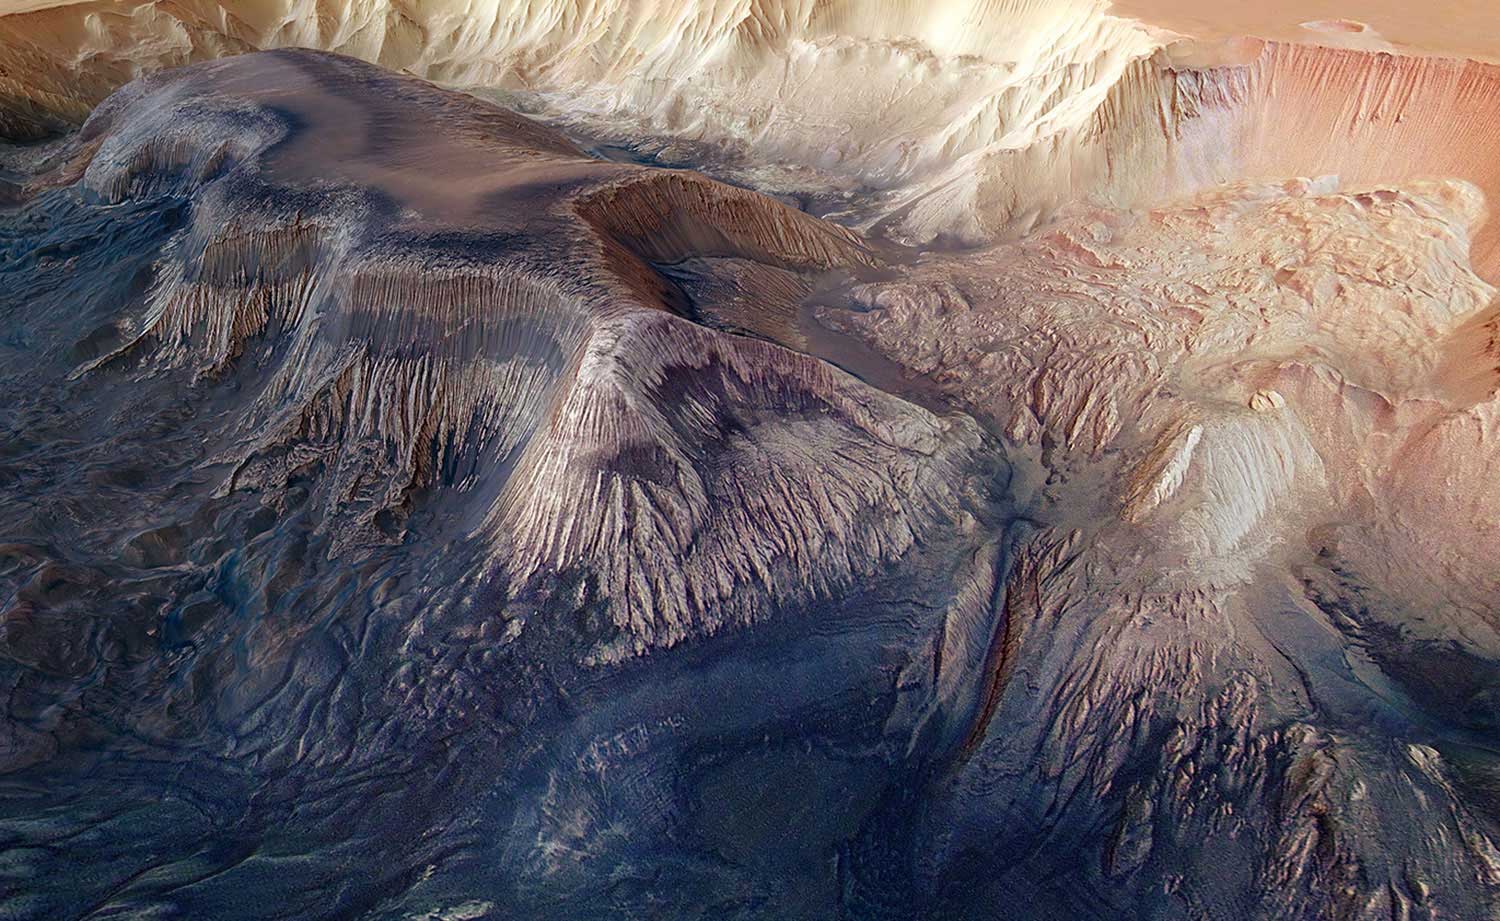 A flat-topped mesa is located in the center of Hebes Chasma on Mars and rises to a similar height as the surrounding plains. Exposed within the walls of the mesa are layers of sediments deposited by wind and water. Numerous grooves are etched into the mountain, suggesting the material is weak and easily eroded.